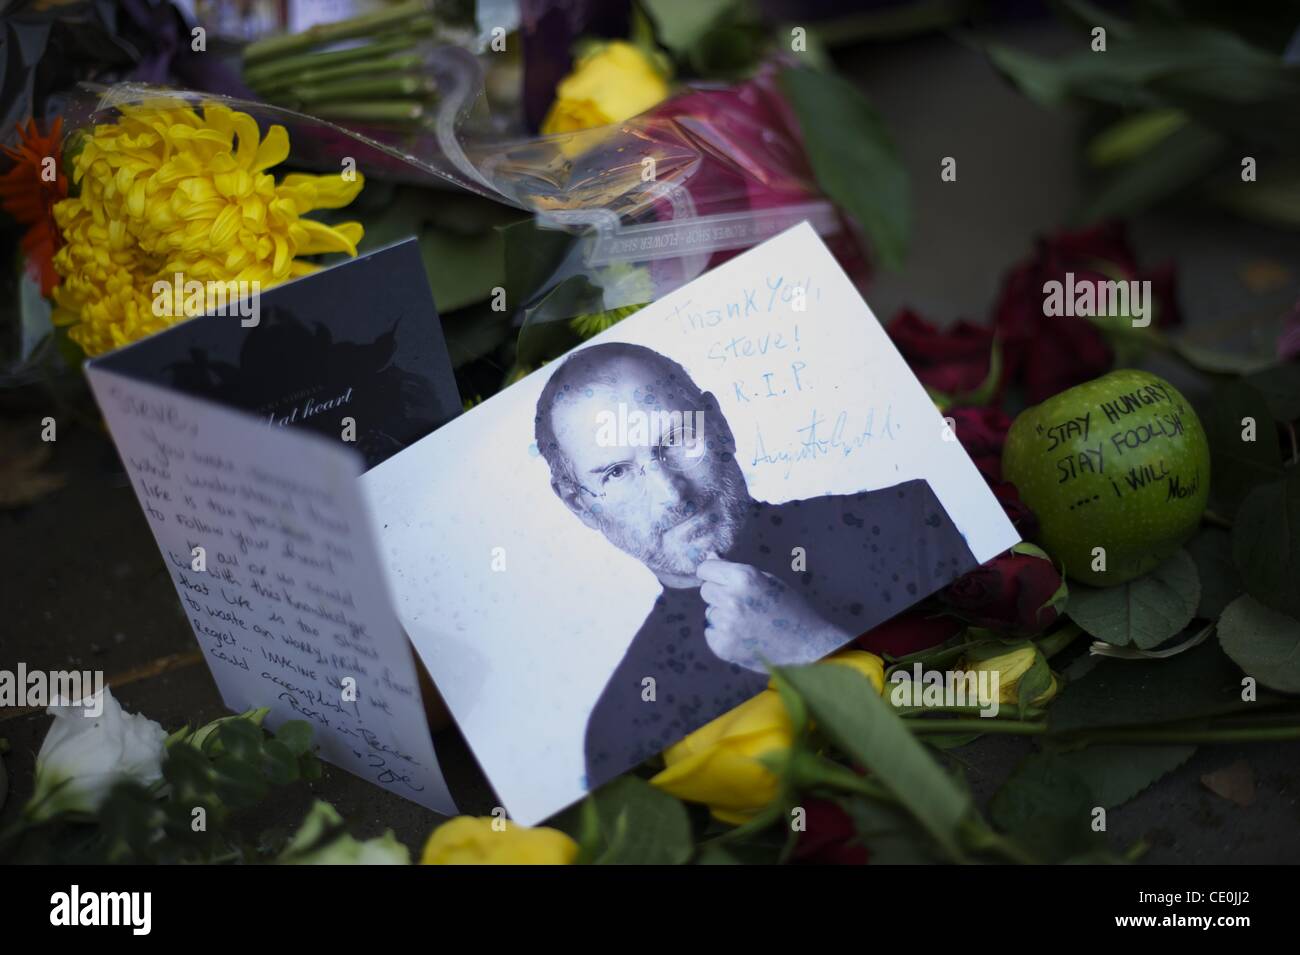 Oct. 6, 2011 - Manchester, England, UK - A memorial for visionary Apple CEO and co-founder STEVE JOBS is created outside the London Regent Street Apple store. (Credit Image: © Mark Makela/ZUMAPRESS.com) Stock Photo